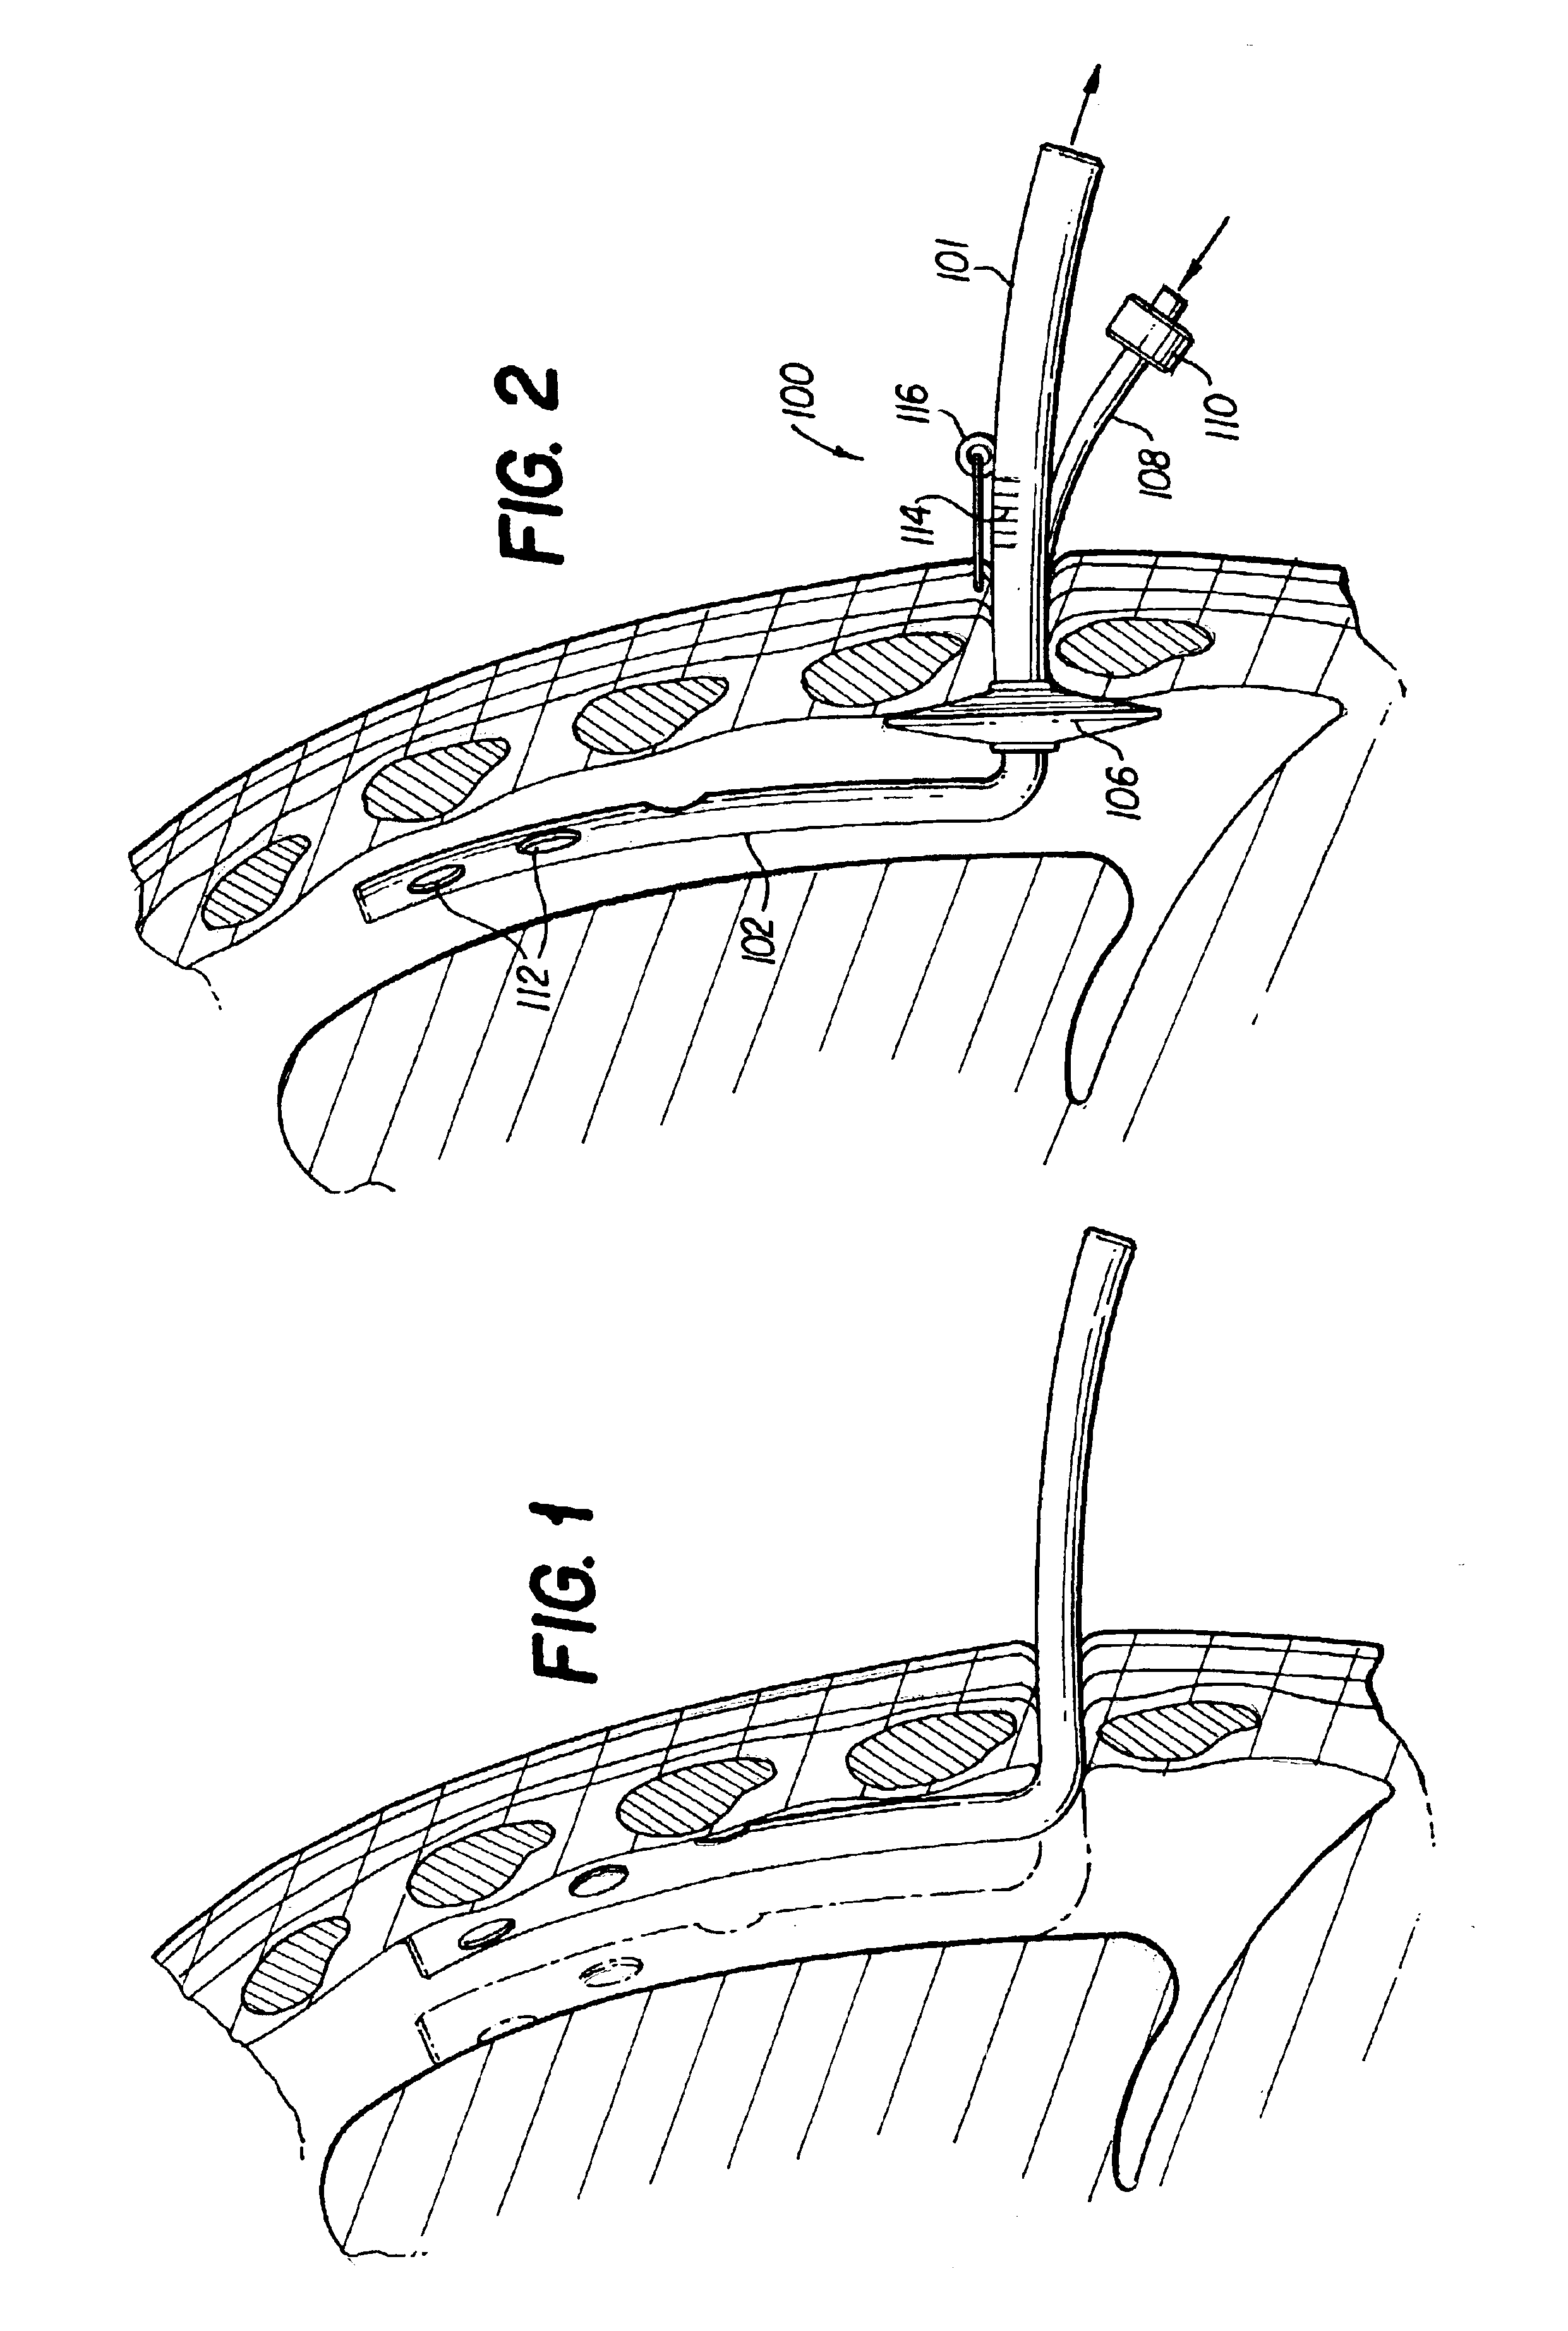 Method and apparatus for pleural drainage